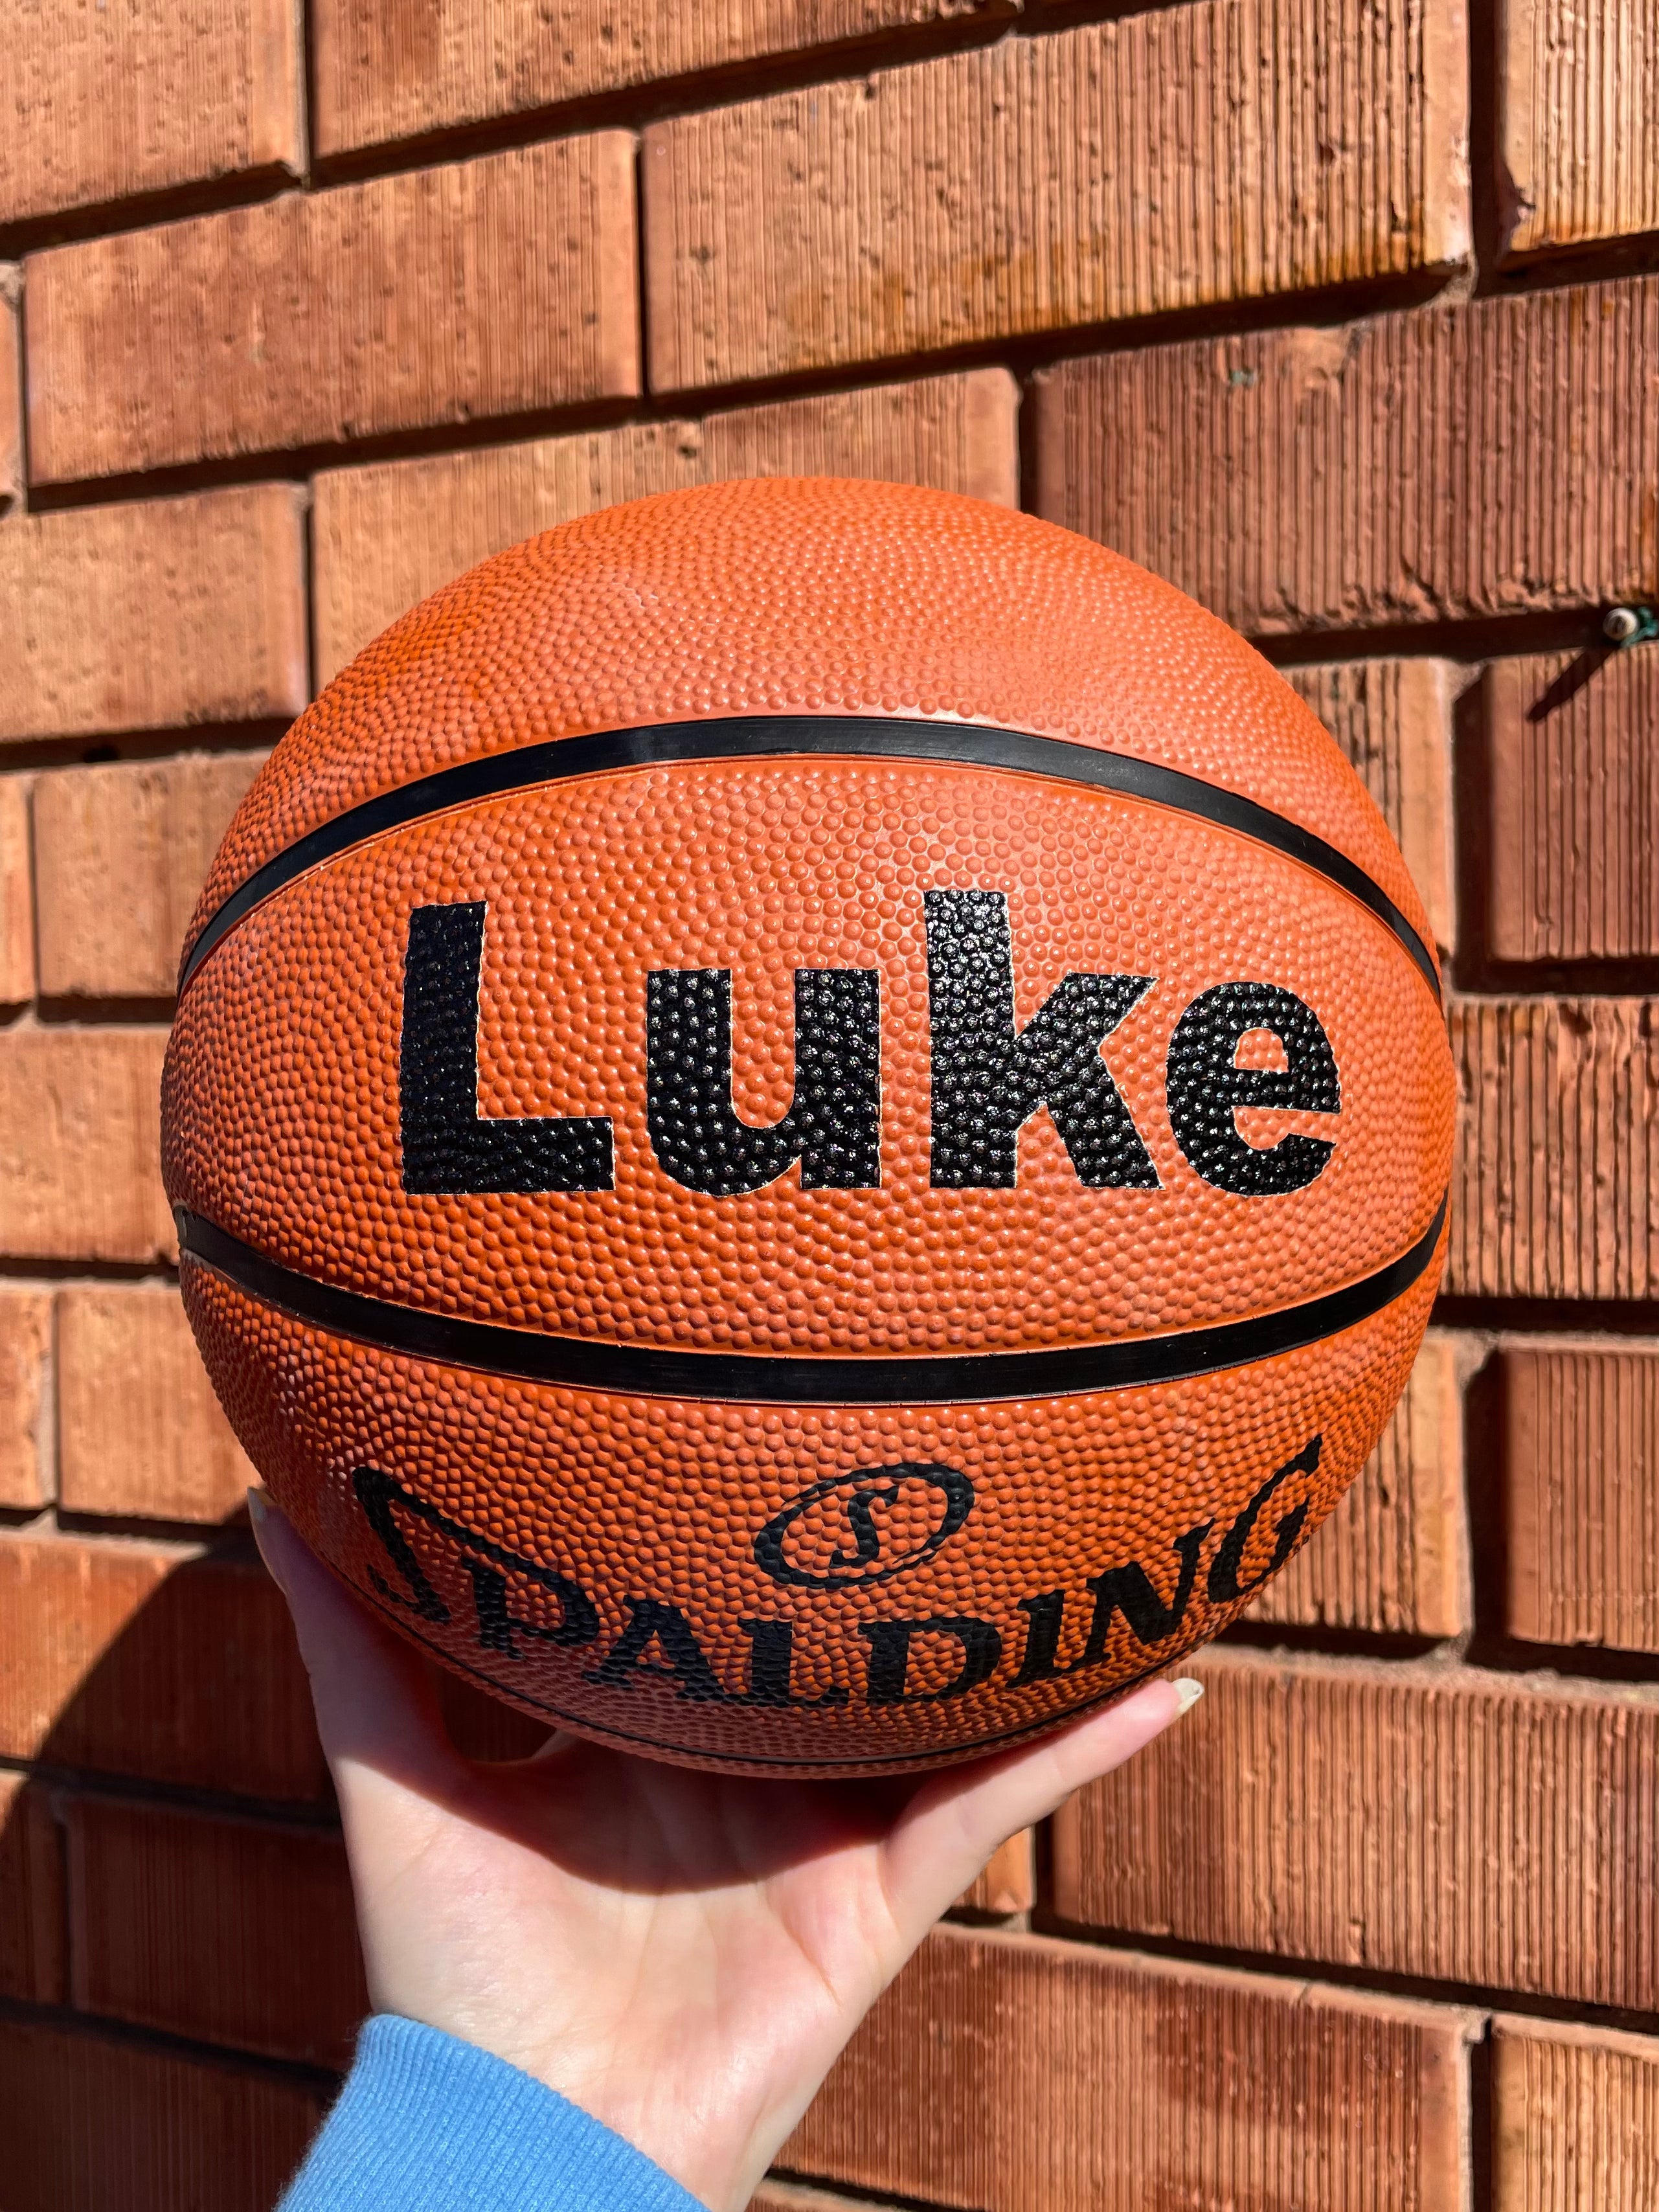 Personalised Spalding TF-50 Rubber Basketball (Size 5, 6 & 7)